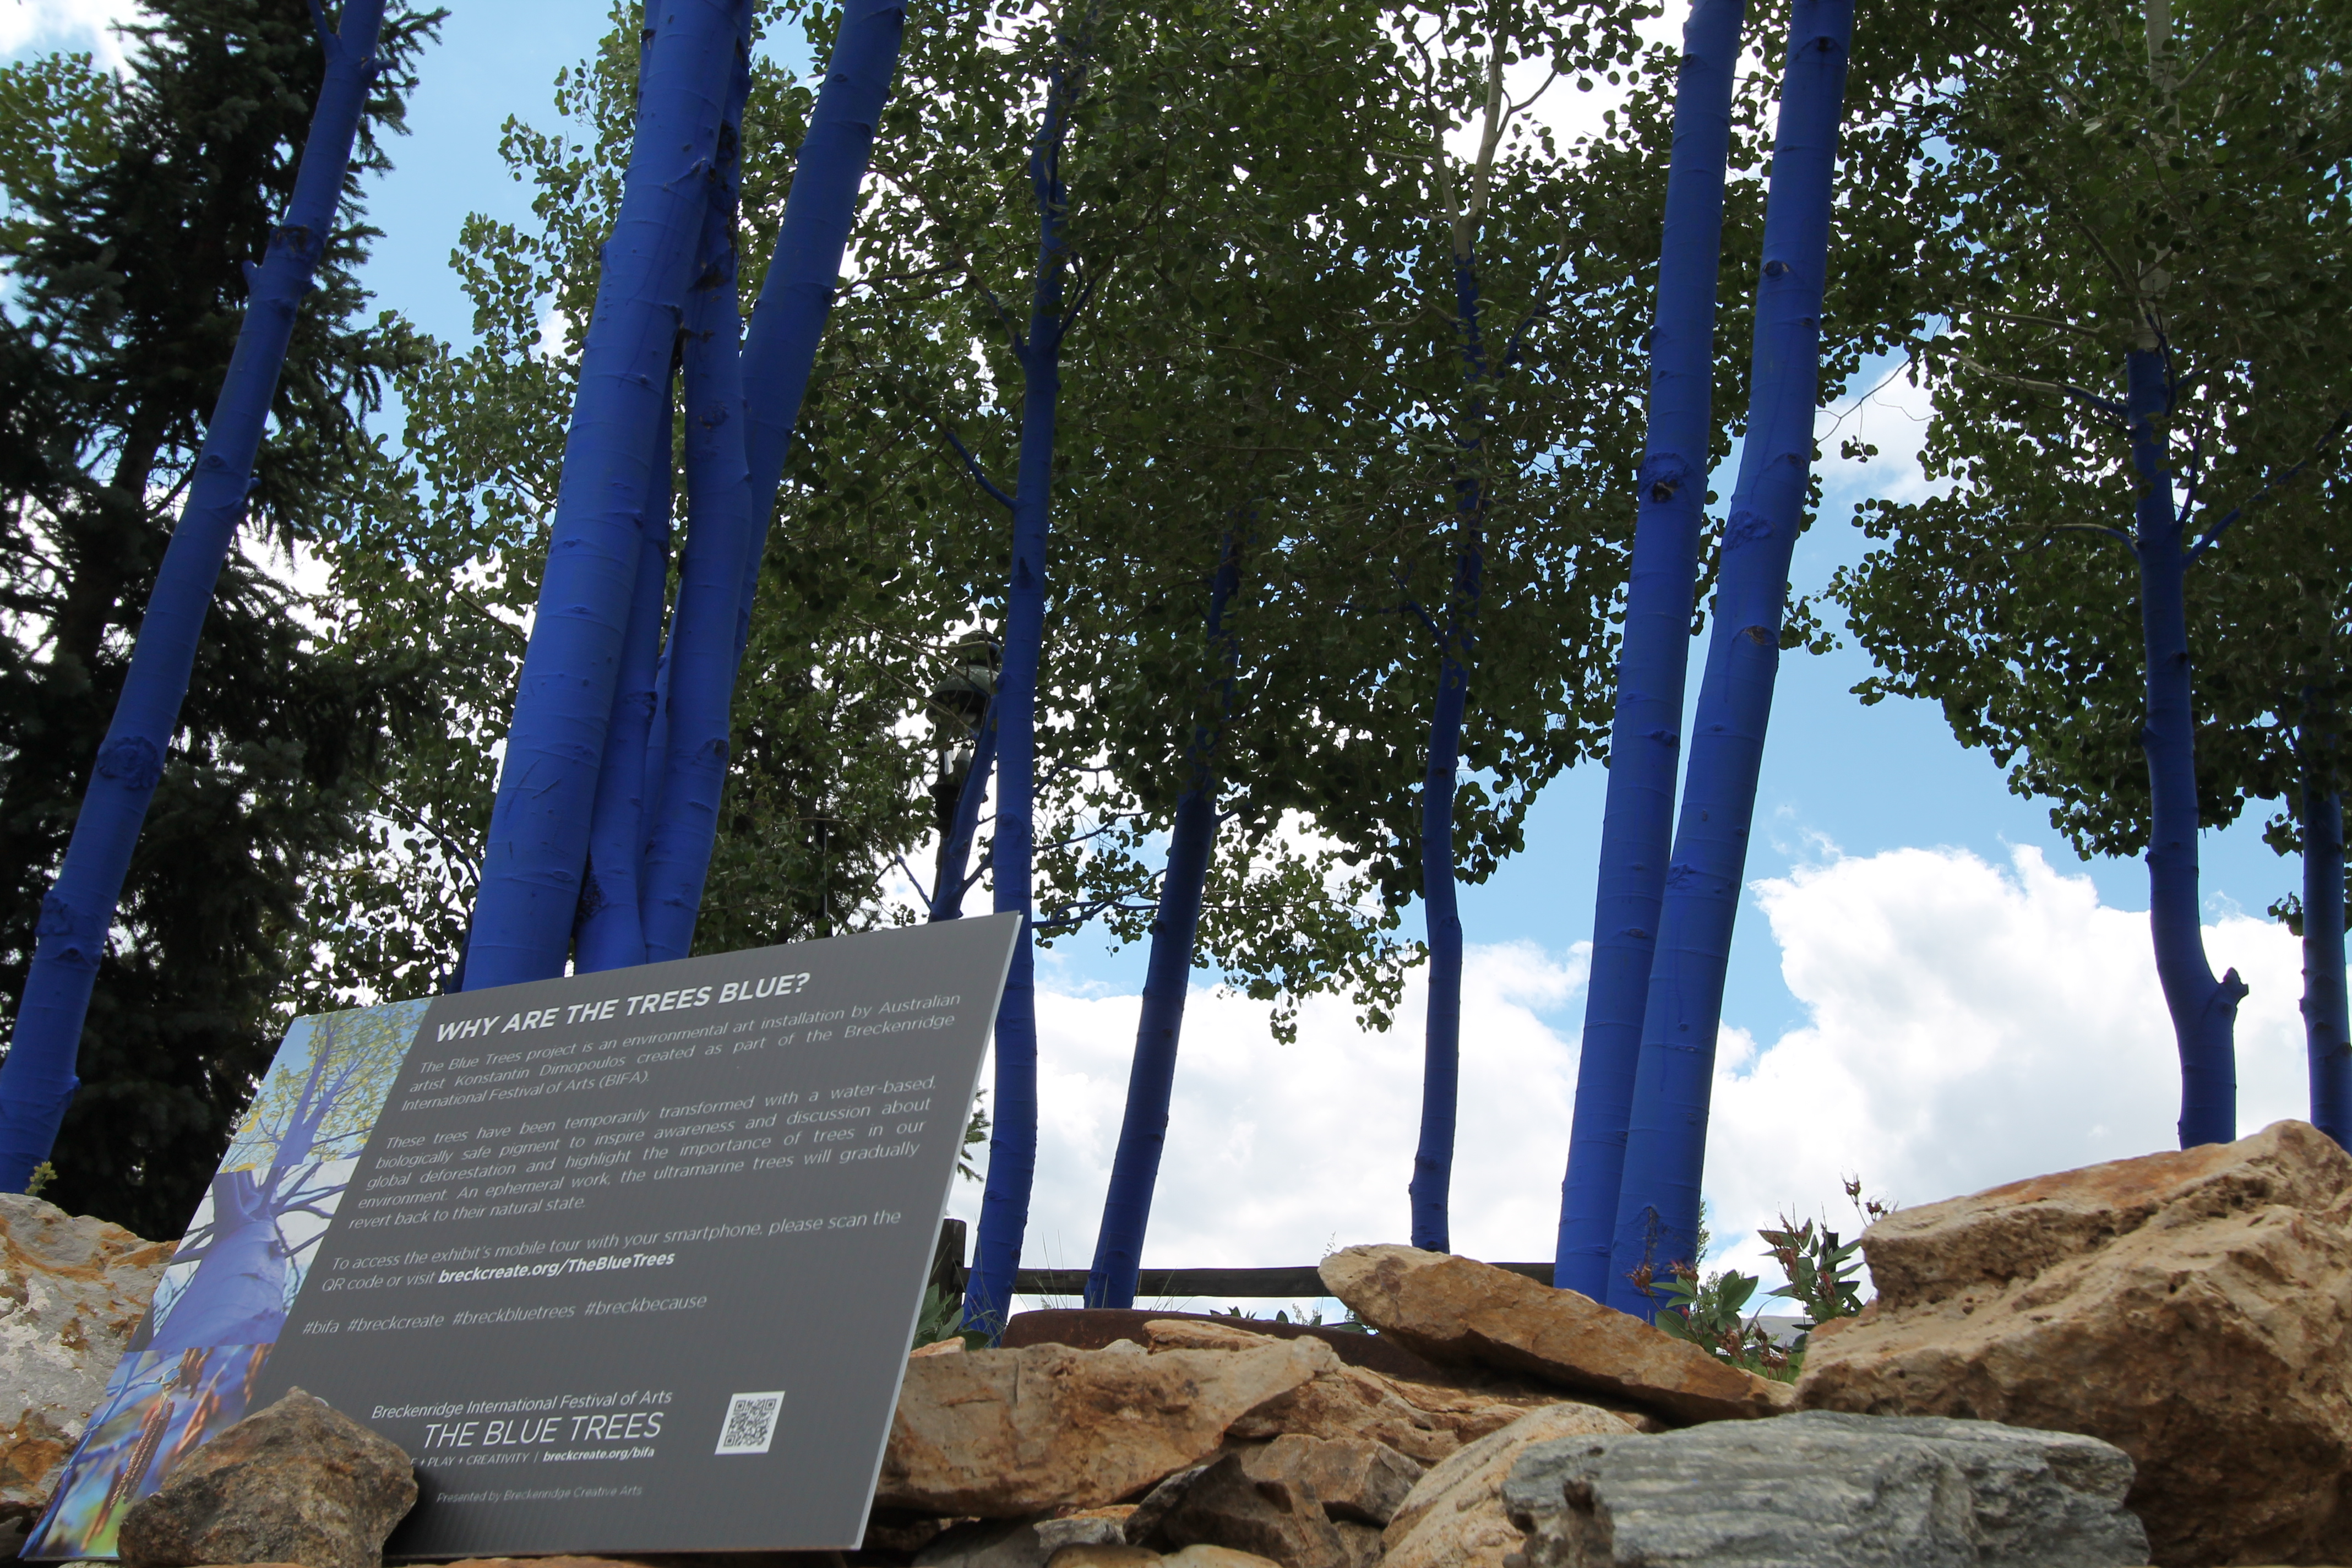 Painted blue trees at the Breckenridge International Festival of Arts